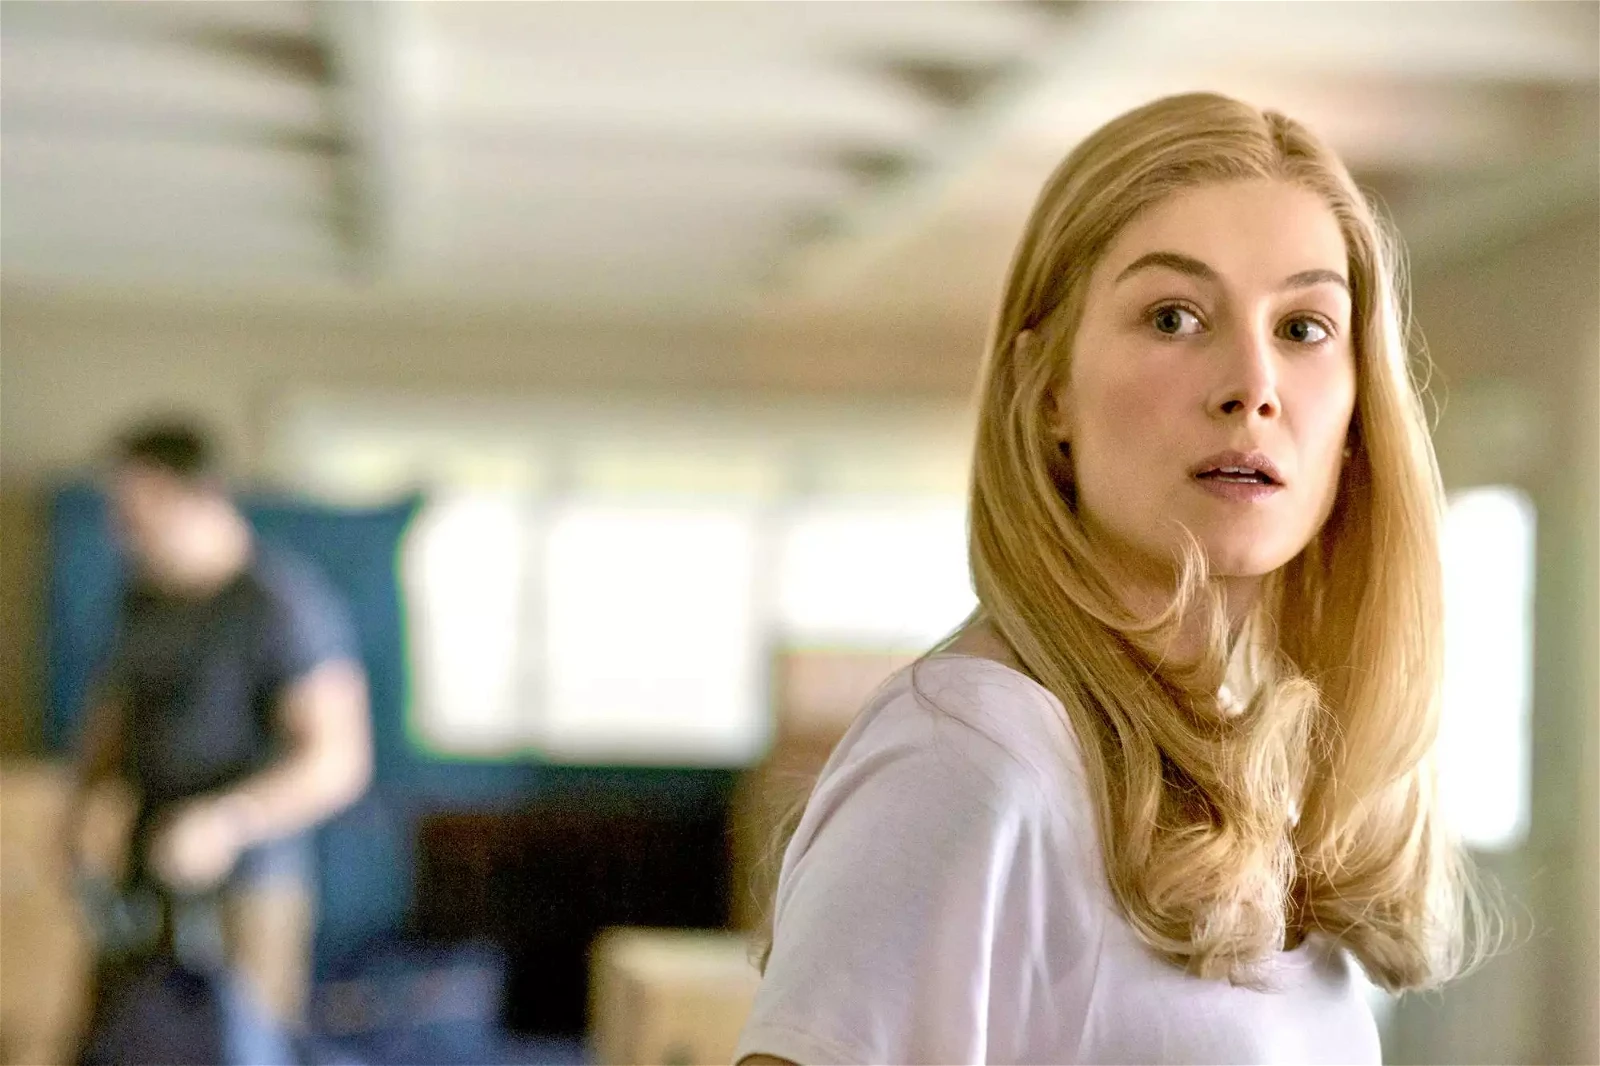 Rosamund Pike won an Oscar nomination for her role in Gone Girl